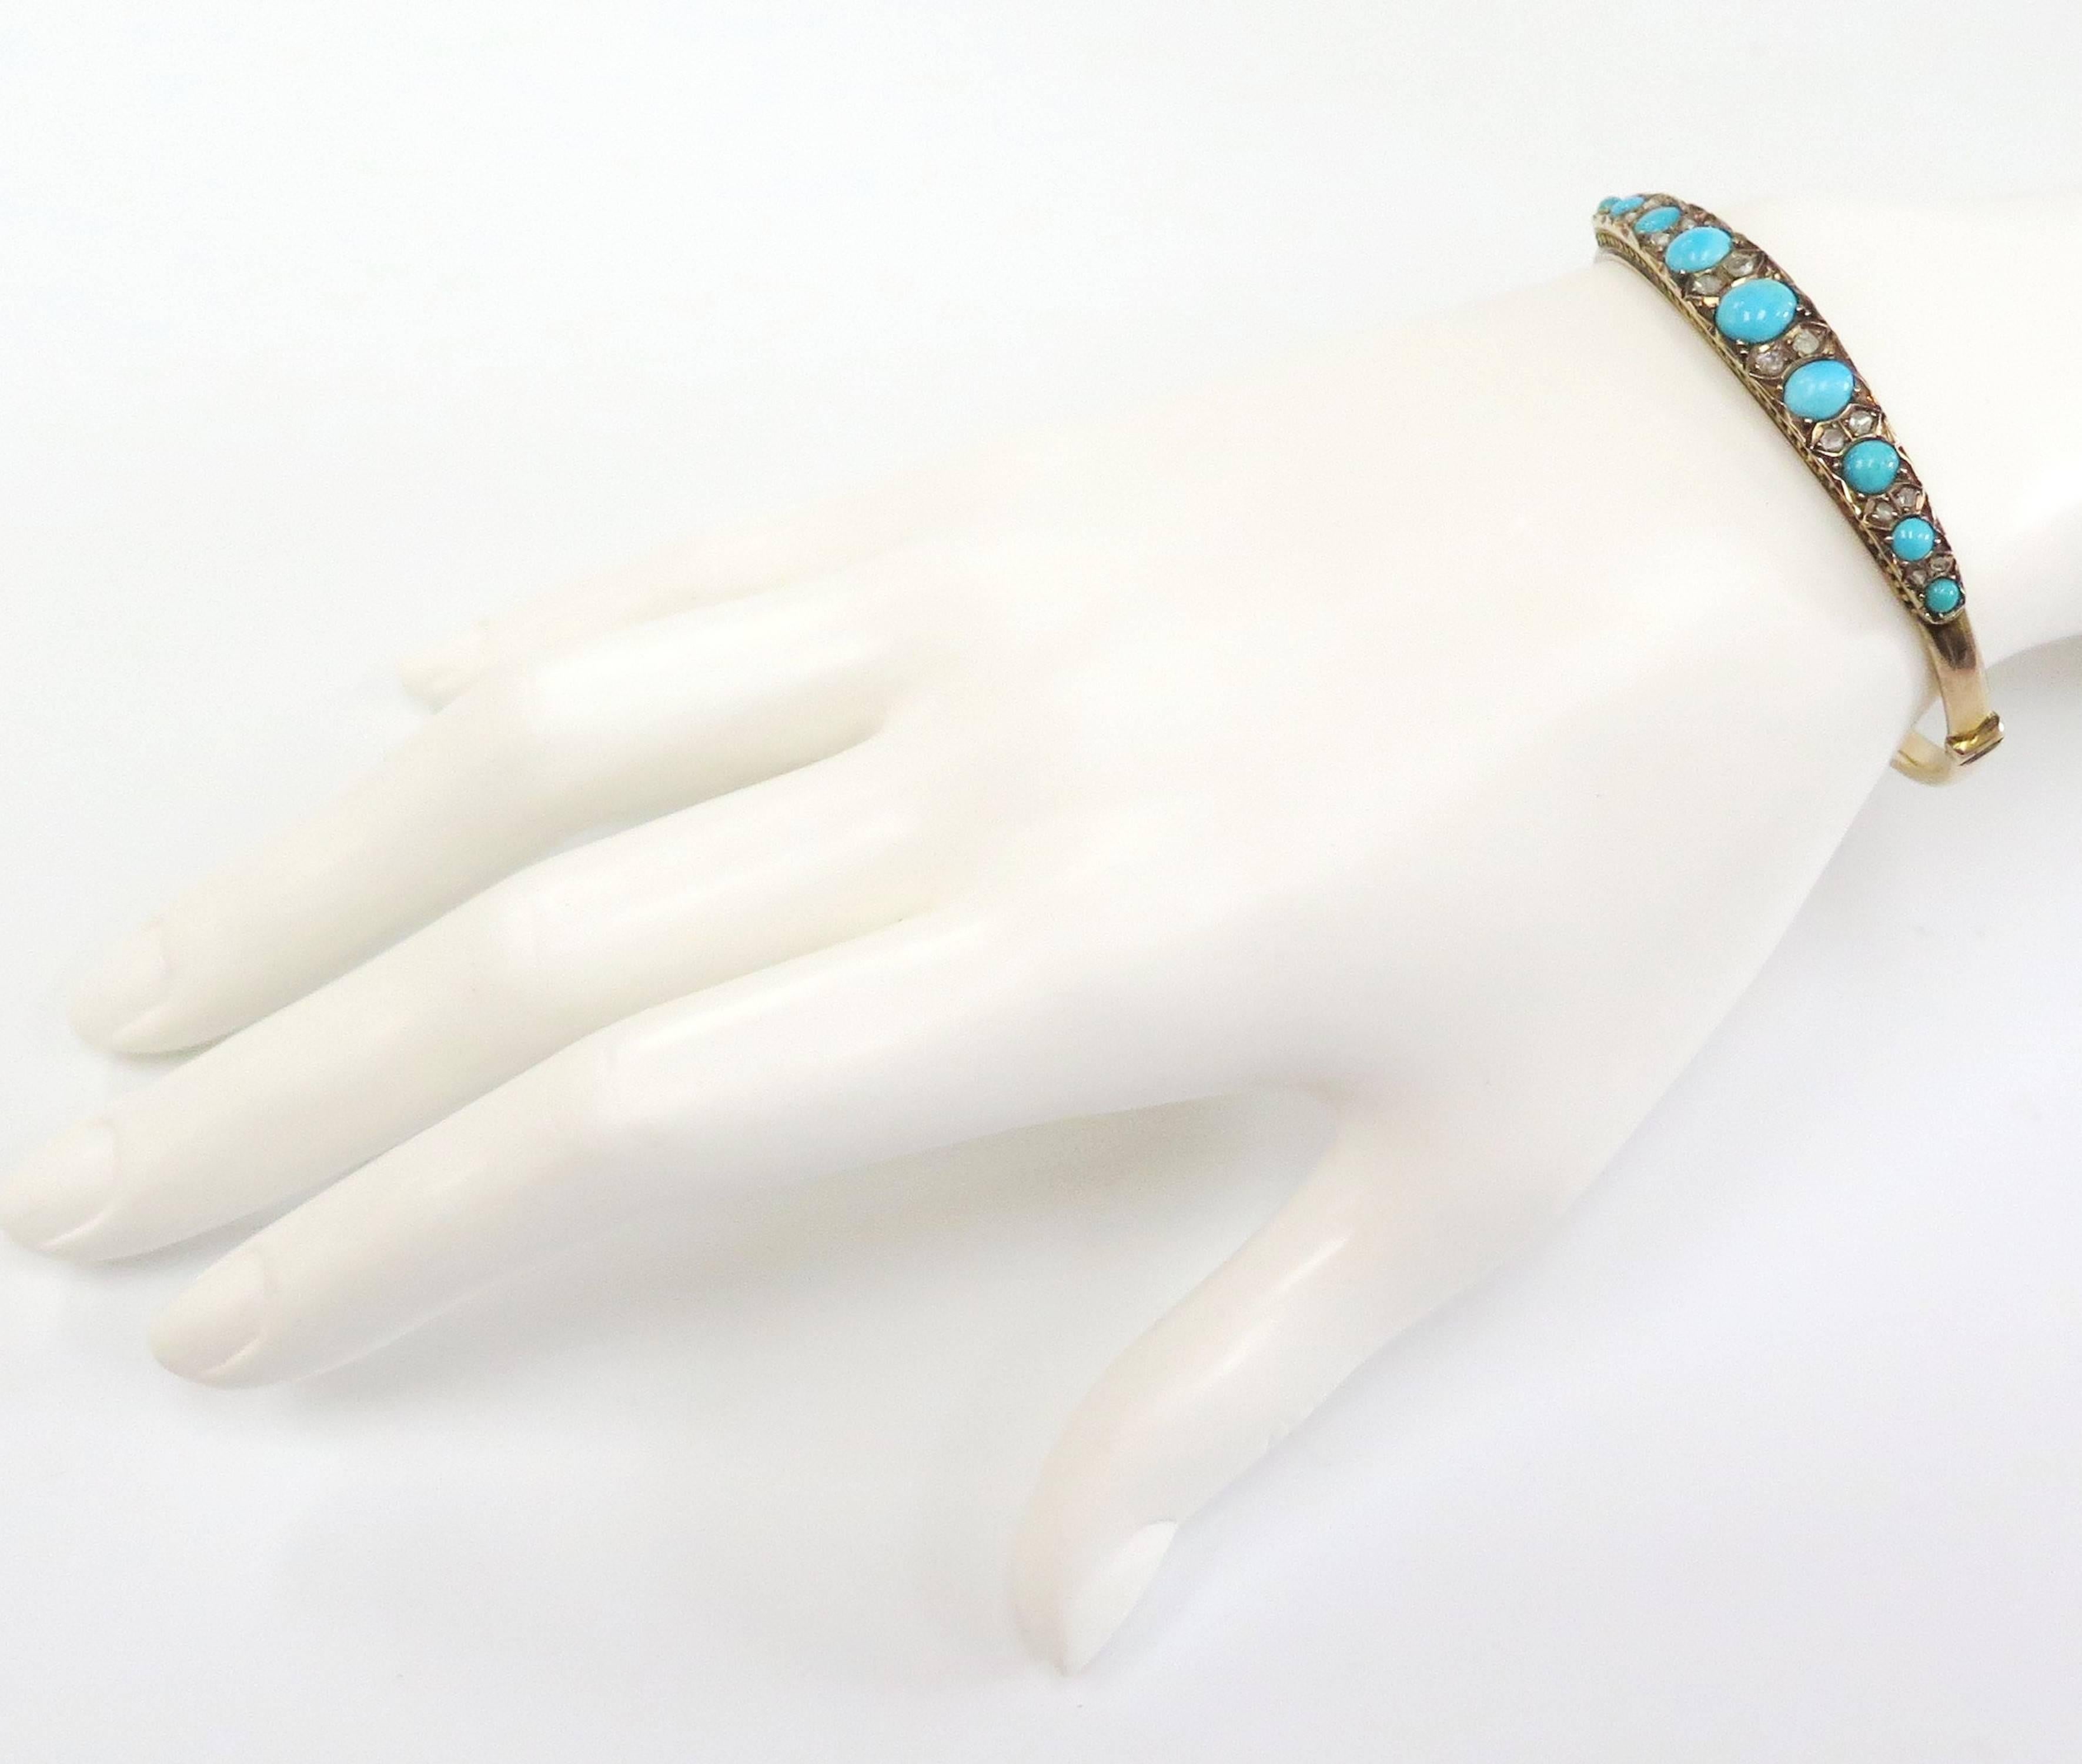 Antique Victorian 1800s Bangle with Turquoise, Rose Cut Diamonds, 14 Karat For Sale 3